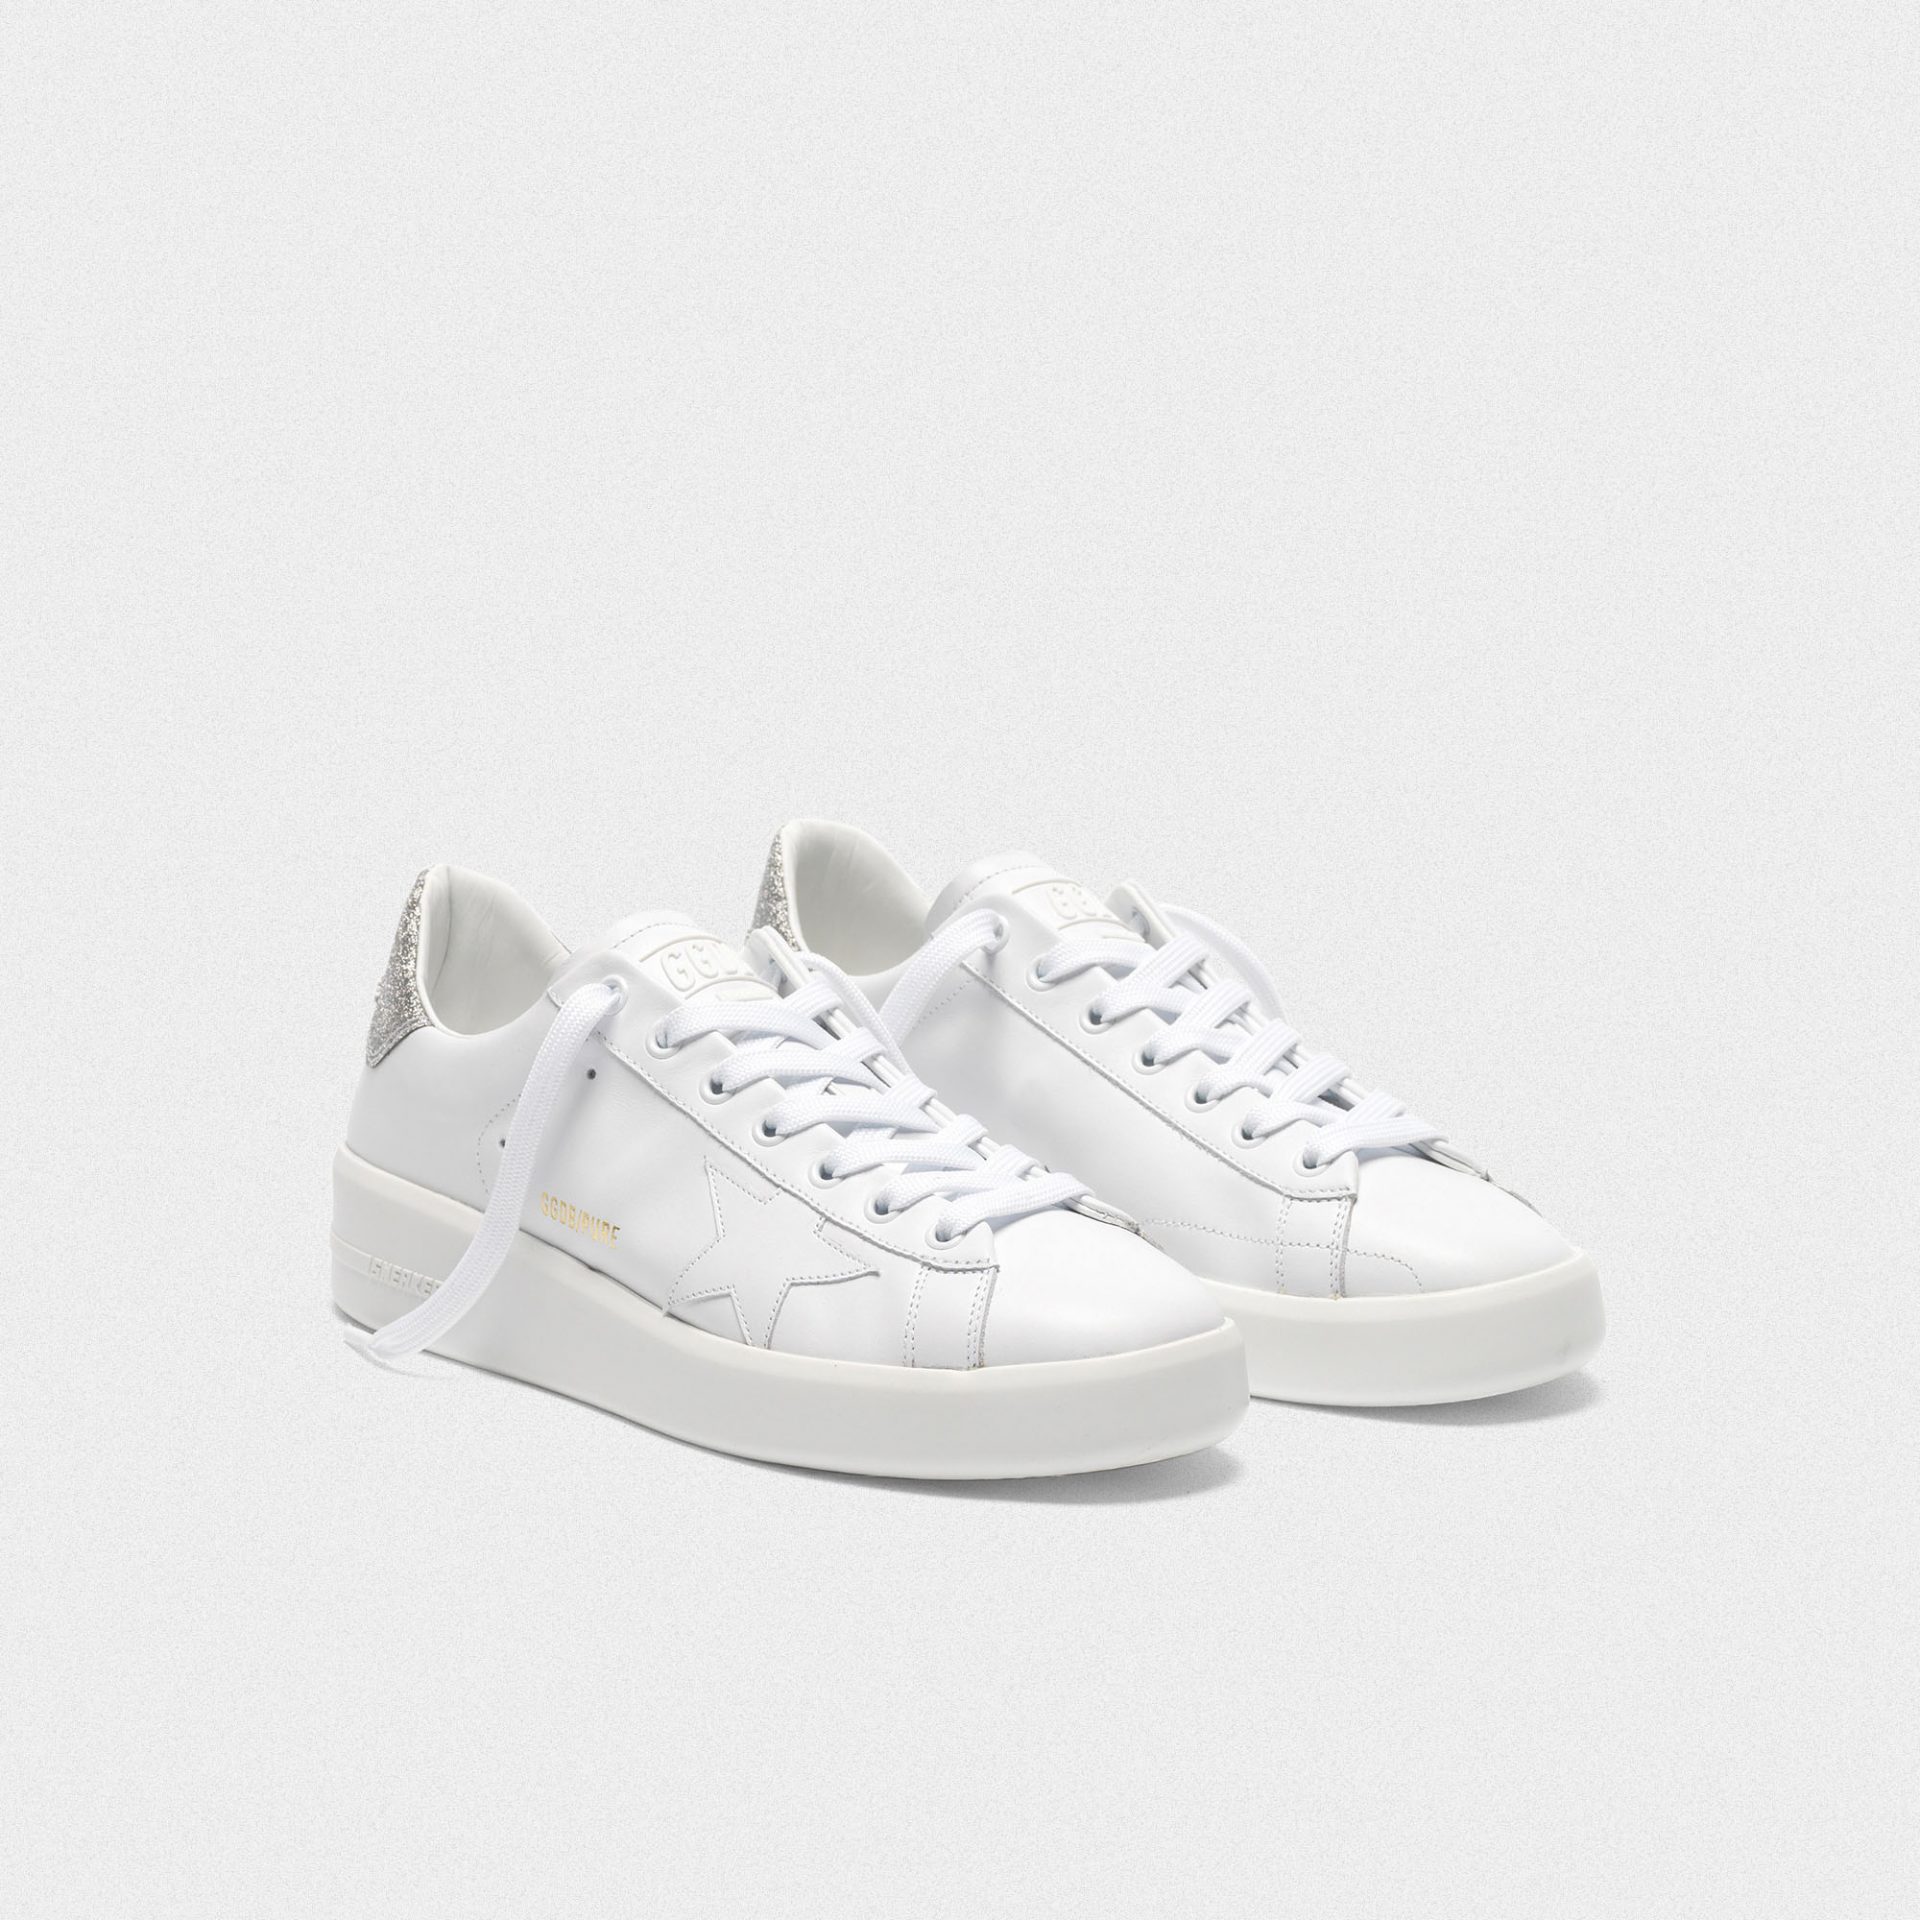 8 Cute White Sneakers We Love - Daily Front Row